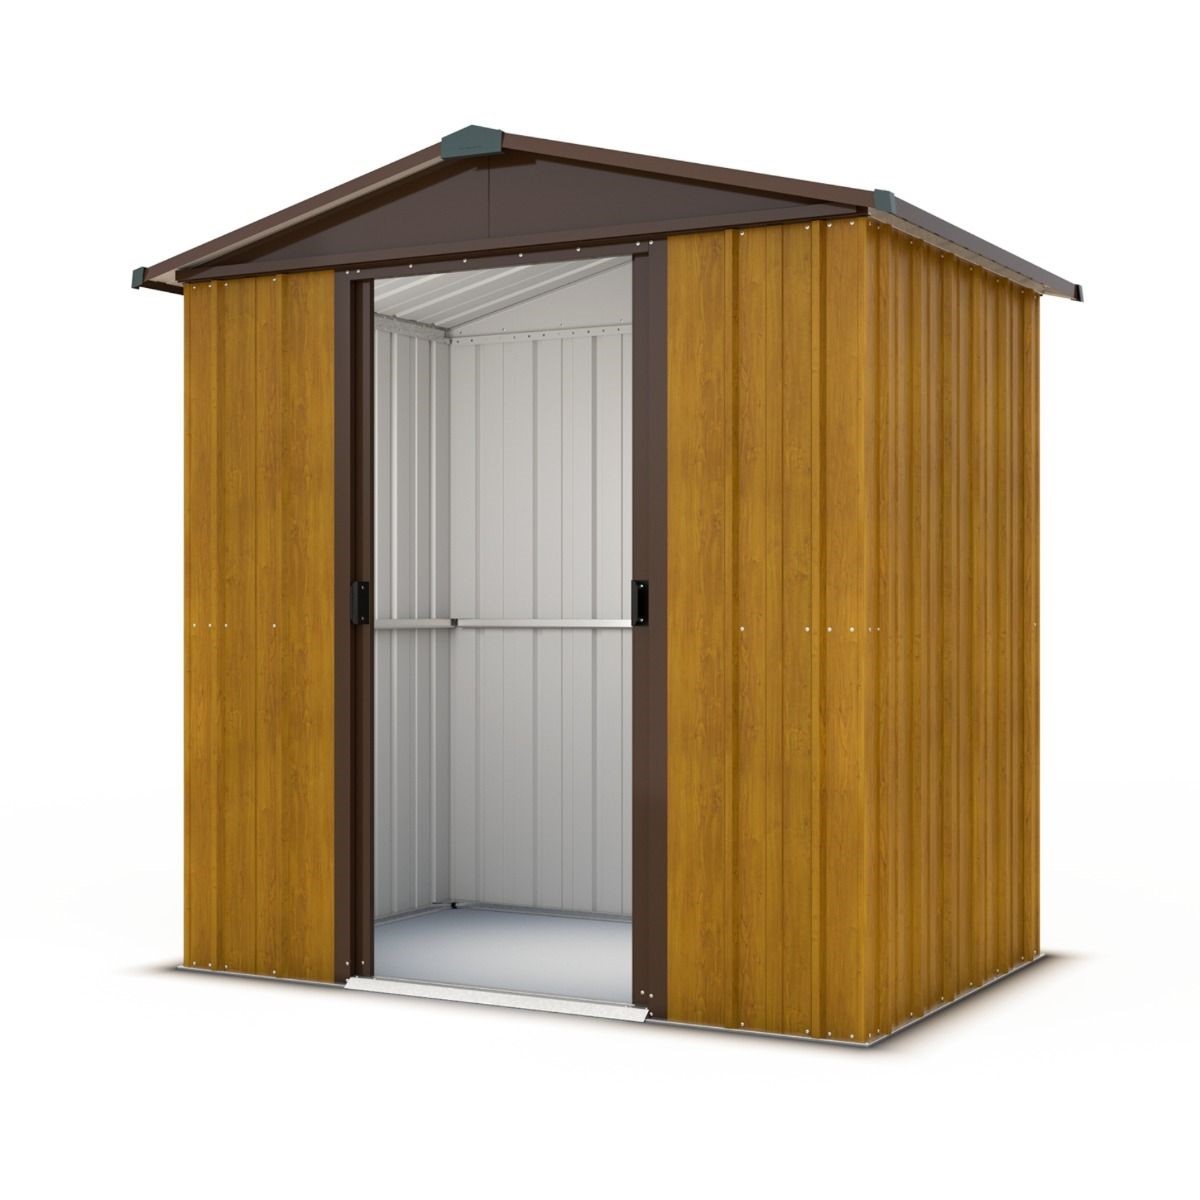 Featured image for “YardMaster 65WGY Woodview Apex Metal Shed”